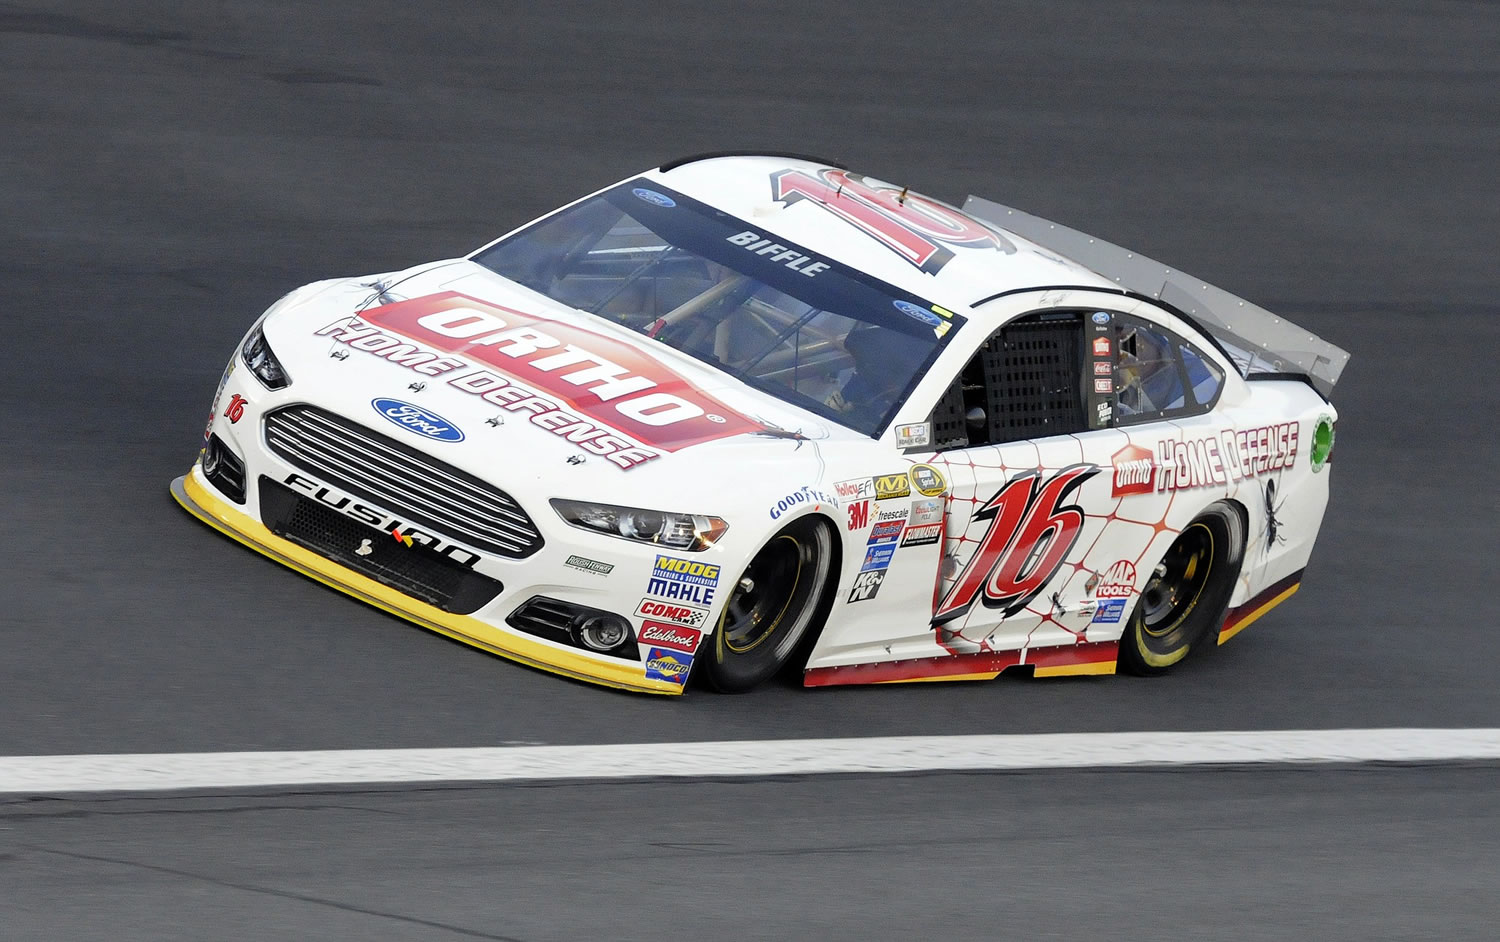 Greg Biffle (16) drives through Turn 4 during the NASCAR Sprint Showdown at Charlotte Motor Speedway in Concord, N.C., Friday, May 15, 2015. Biffle won the first segment to advance to Saturday's All-Star Race.